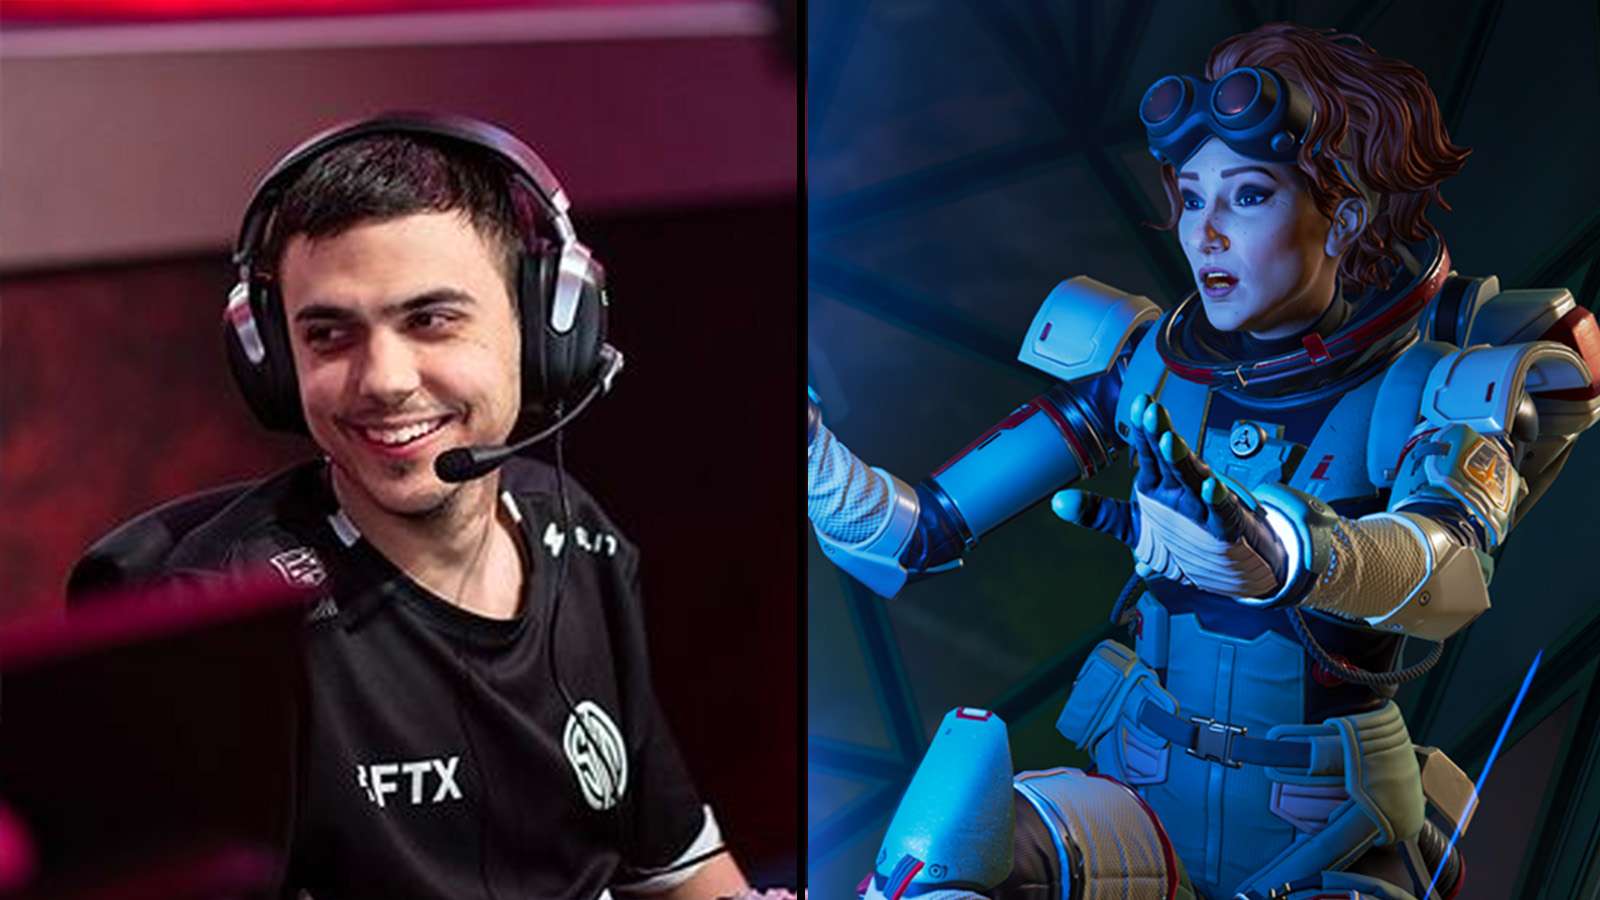 ImperialHal competing for TSM next to Horizon in Apex Legends